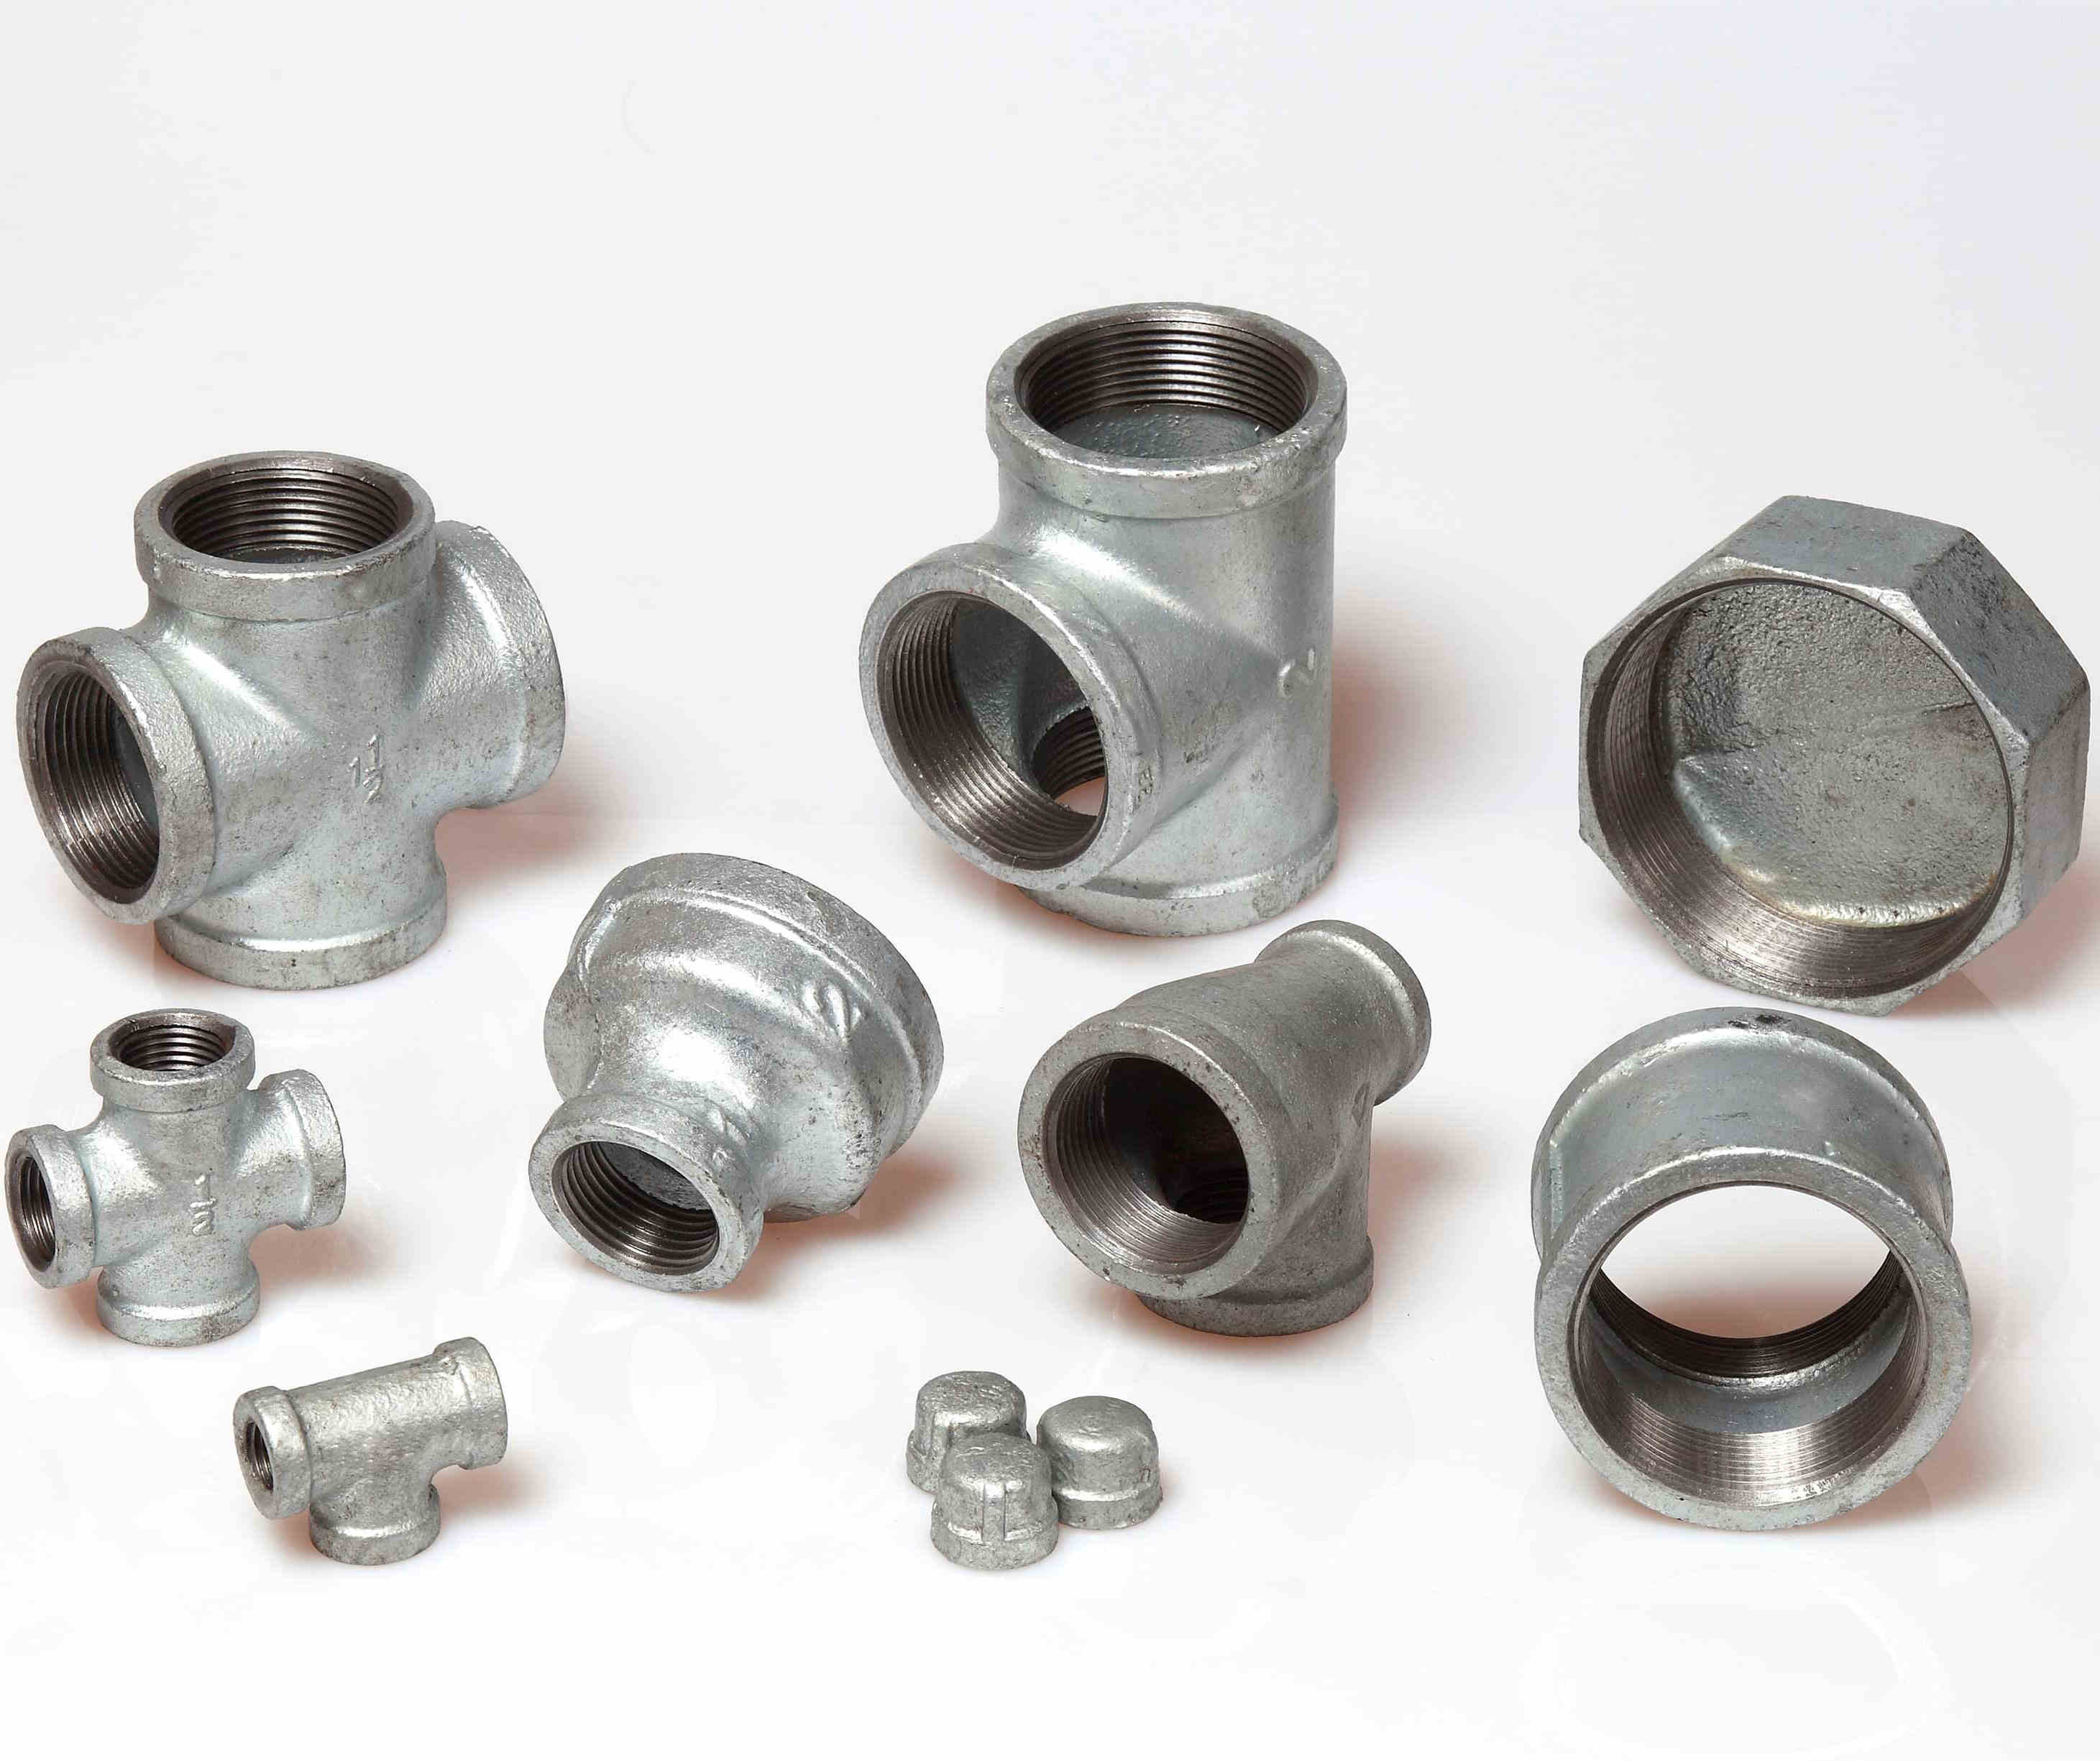 China Union Malleable Iron Pipe Fittings Industry No330 Manufacturer &  Supplier 